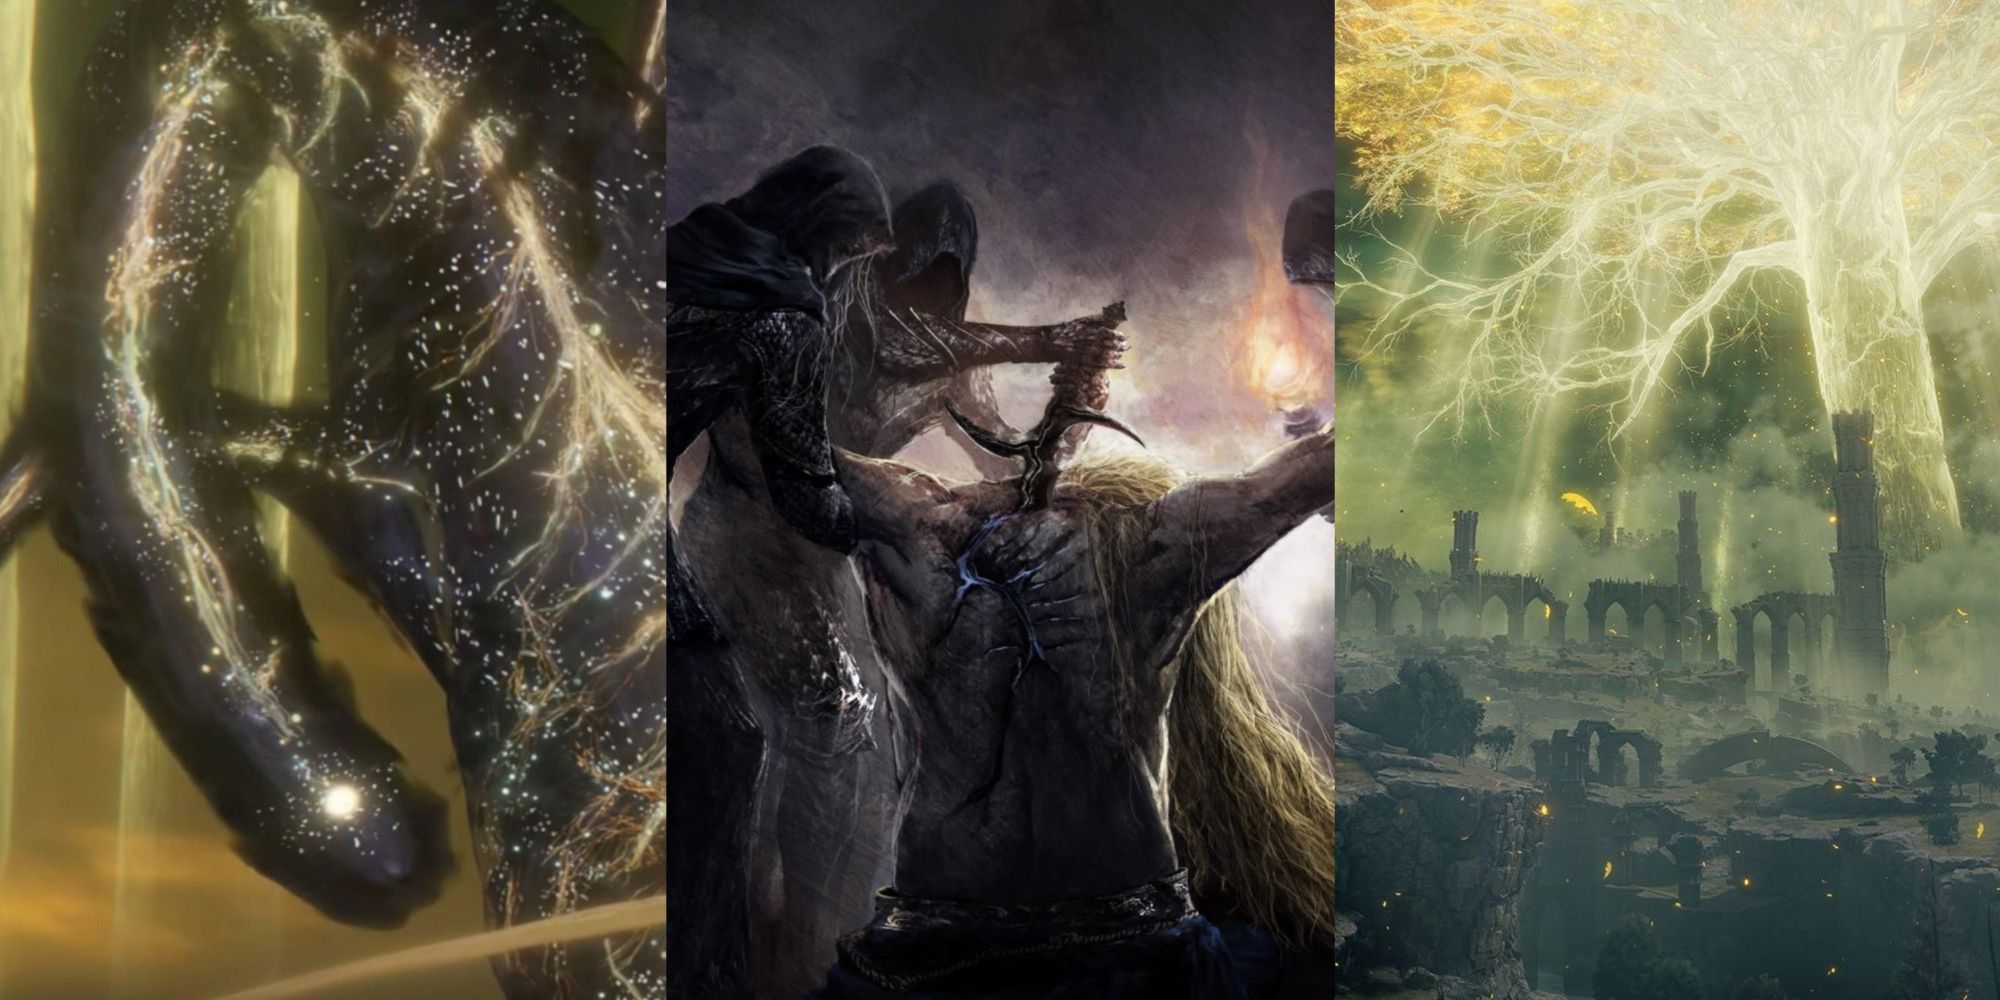 The Elden Beast, Godwyn being killed by the Black Knives, and the Erdtree over The Lands Between, left to right